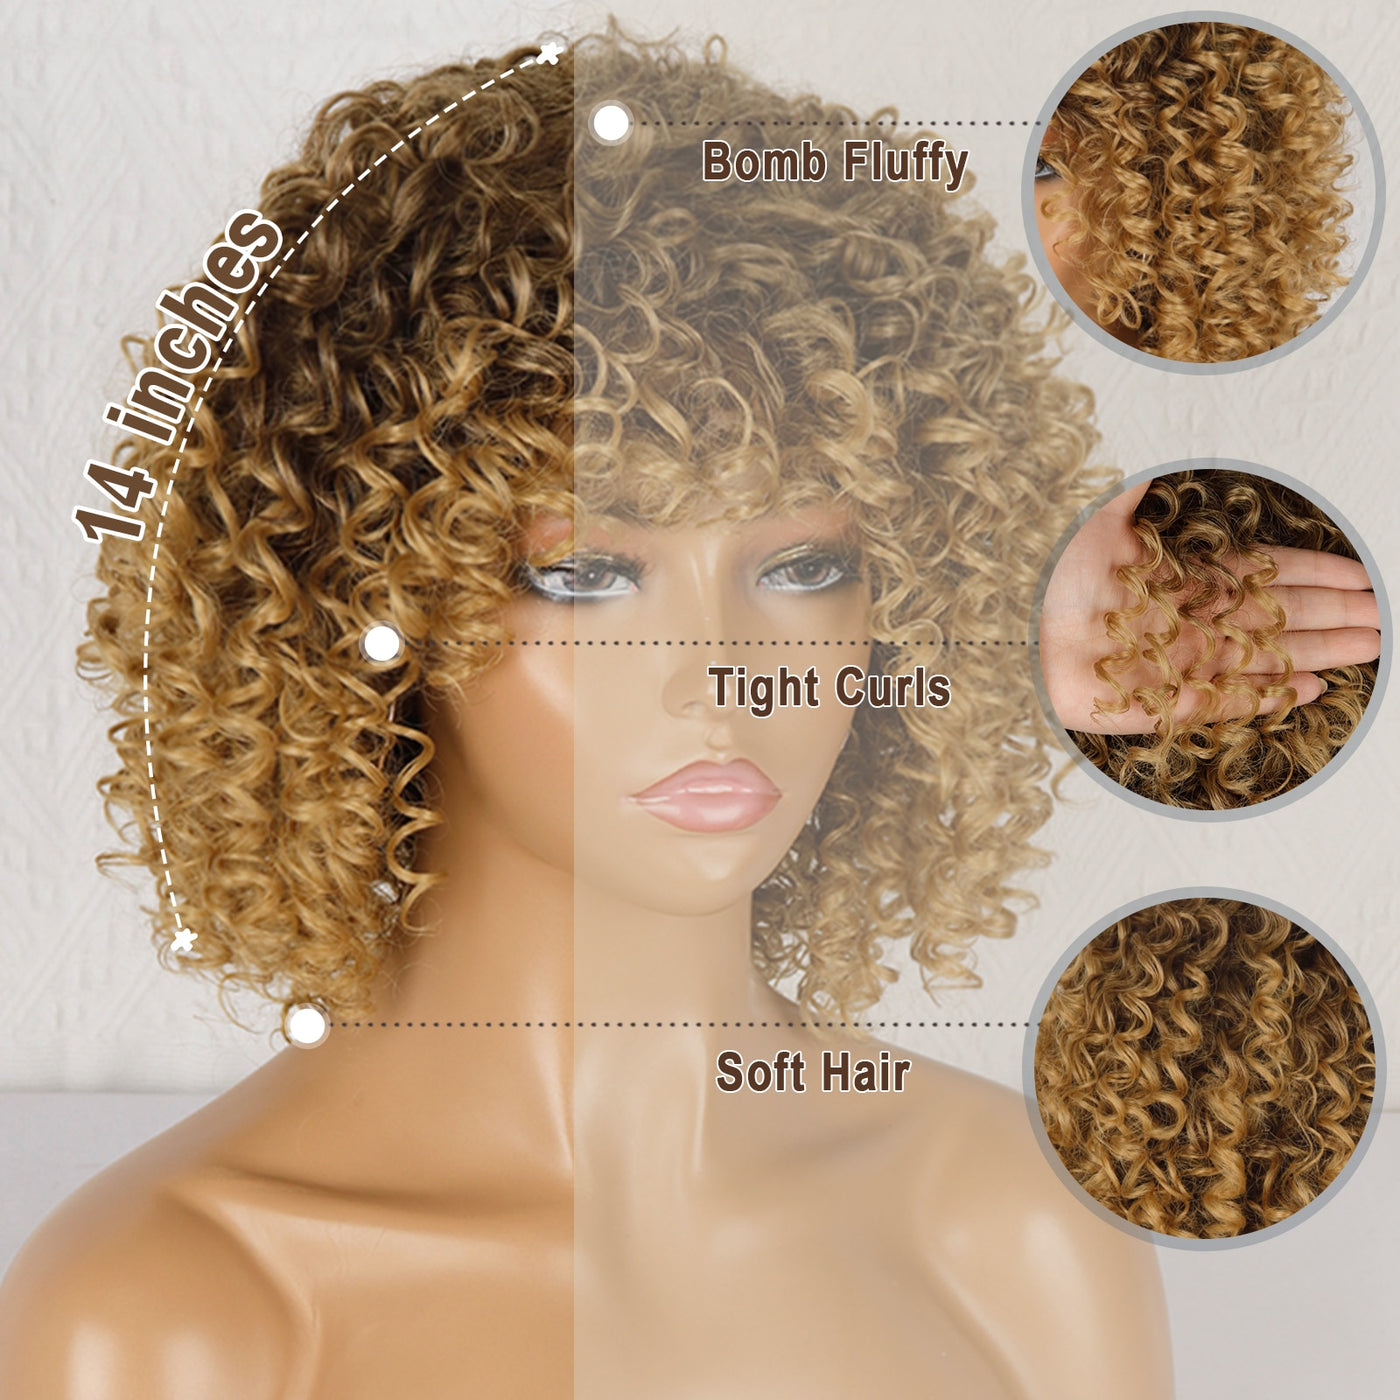 Embrace Your Natural Beauty with the Afro Kinky Curly Wig